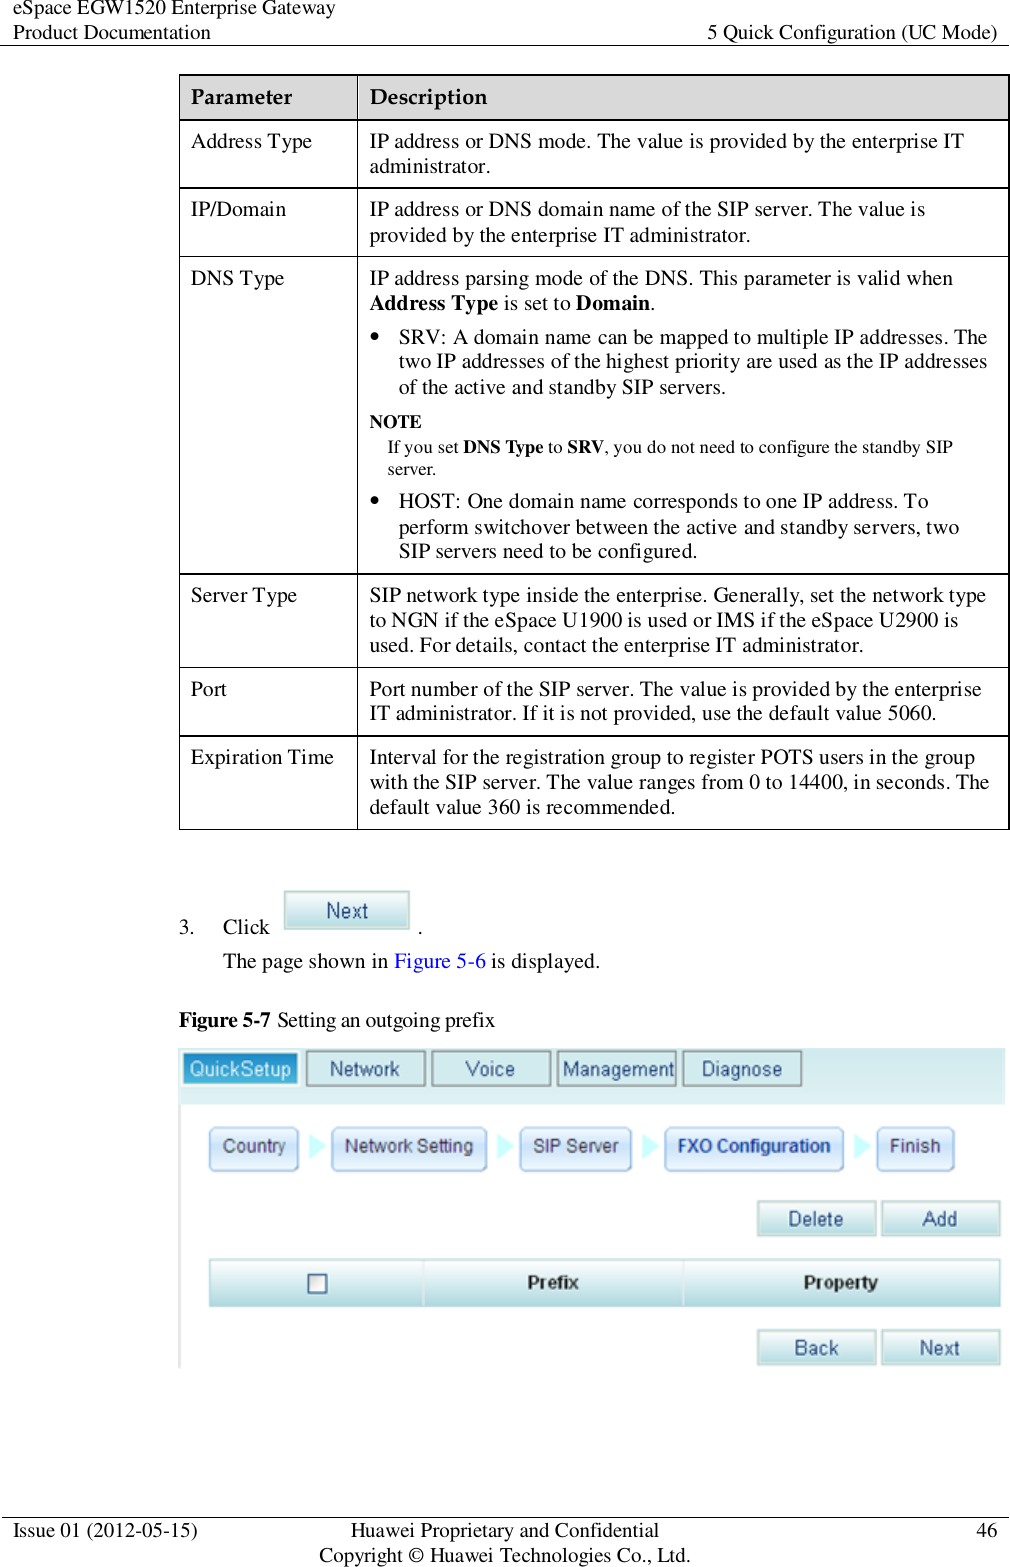 eSpace EGW1520 Enterprise Gateway Product Documentation 5 Quick Configuration (UC Mode)  Issue 01 (2012-05-15) Huawei Proprietary and Confidential                                     Copyright © Huawei Technologies Co., Ltd. 46  Parameter Description Address Type IP address or DNS mode. The value is provided by the enterprise IT administrator. IP/Domain IP address or DNS domain name of the SIP server. The value is provided by the enterprise IT administrator. DNS Type IP address parsing mode of the DNS. This parameter is valid when Address Type is set to Domain.  SRV: A domain name can be mapped to multiple IP addresses. The two IP addresses of the highest priority are used as the IP addresses of the active and standby SIP servers. NOTE If you set DNS Type to SRV, you do not need to configure the standby SIP server.  HOST: One domain name corresponds to one IP address. To perform switchover between the active and standby servers, two SIP servers need to be configured. Server Type SIP network type inside the enterprise. Generally, set the network type to NGN if the eSpace U1900 is used or IMS if the eSpace U2900 is used. For details, contact the enterprise IT administrator. Port Port number of the SIP server. The value is provided by the enterprise IT administrator. If it is not provided, use the default value 5060. Expiration Time Interval for the registration group to register POTS users in the group with the SIP server. The value ranges from 0 to 14400, in seconds. The default value 360 is recommended.  3. Click  . The page shown in Figure 5-6 is displayed. Figure 5-7 Setting an outgoing prefix   